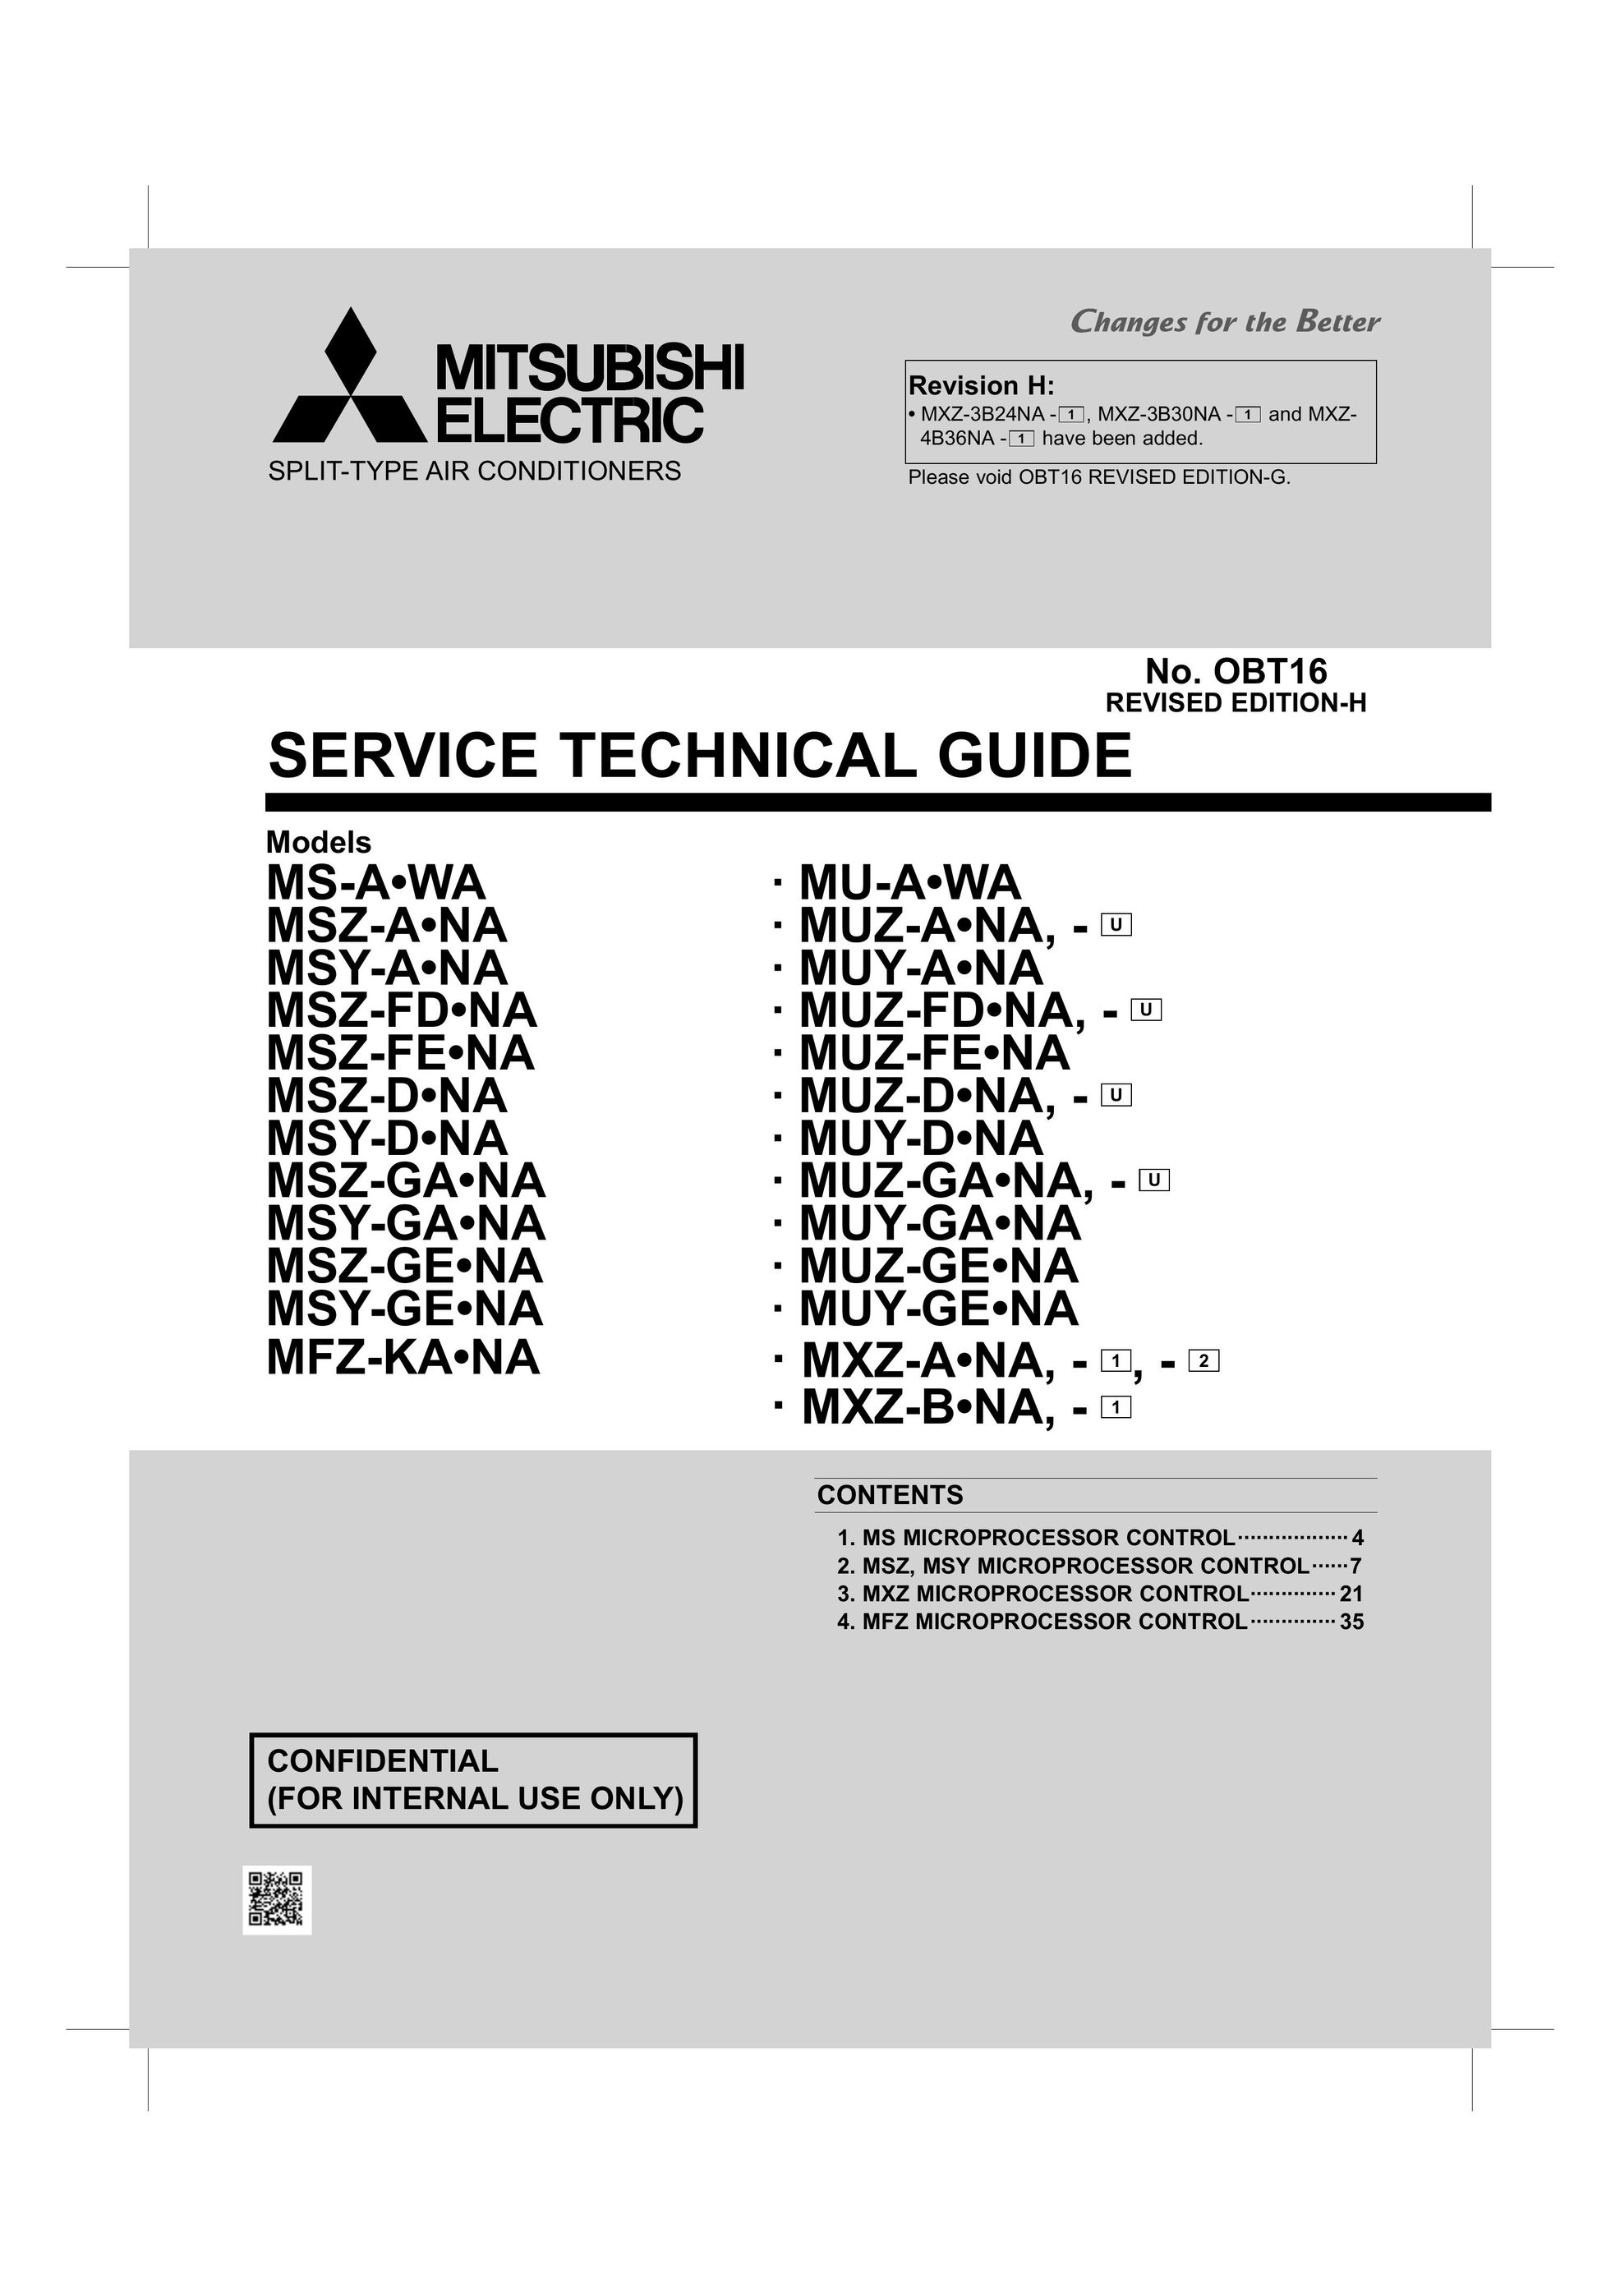 Mitsumi electronic MUY-DNA Air Conditioner User Manual